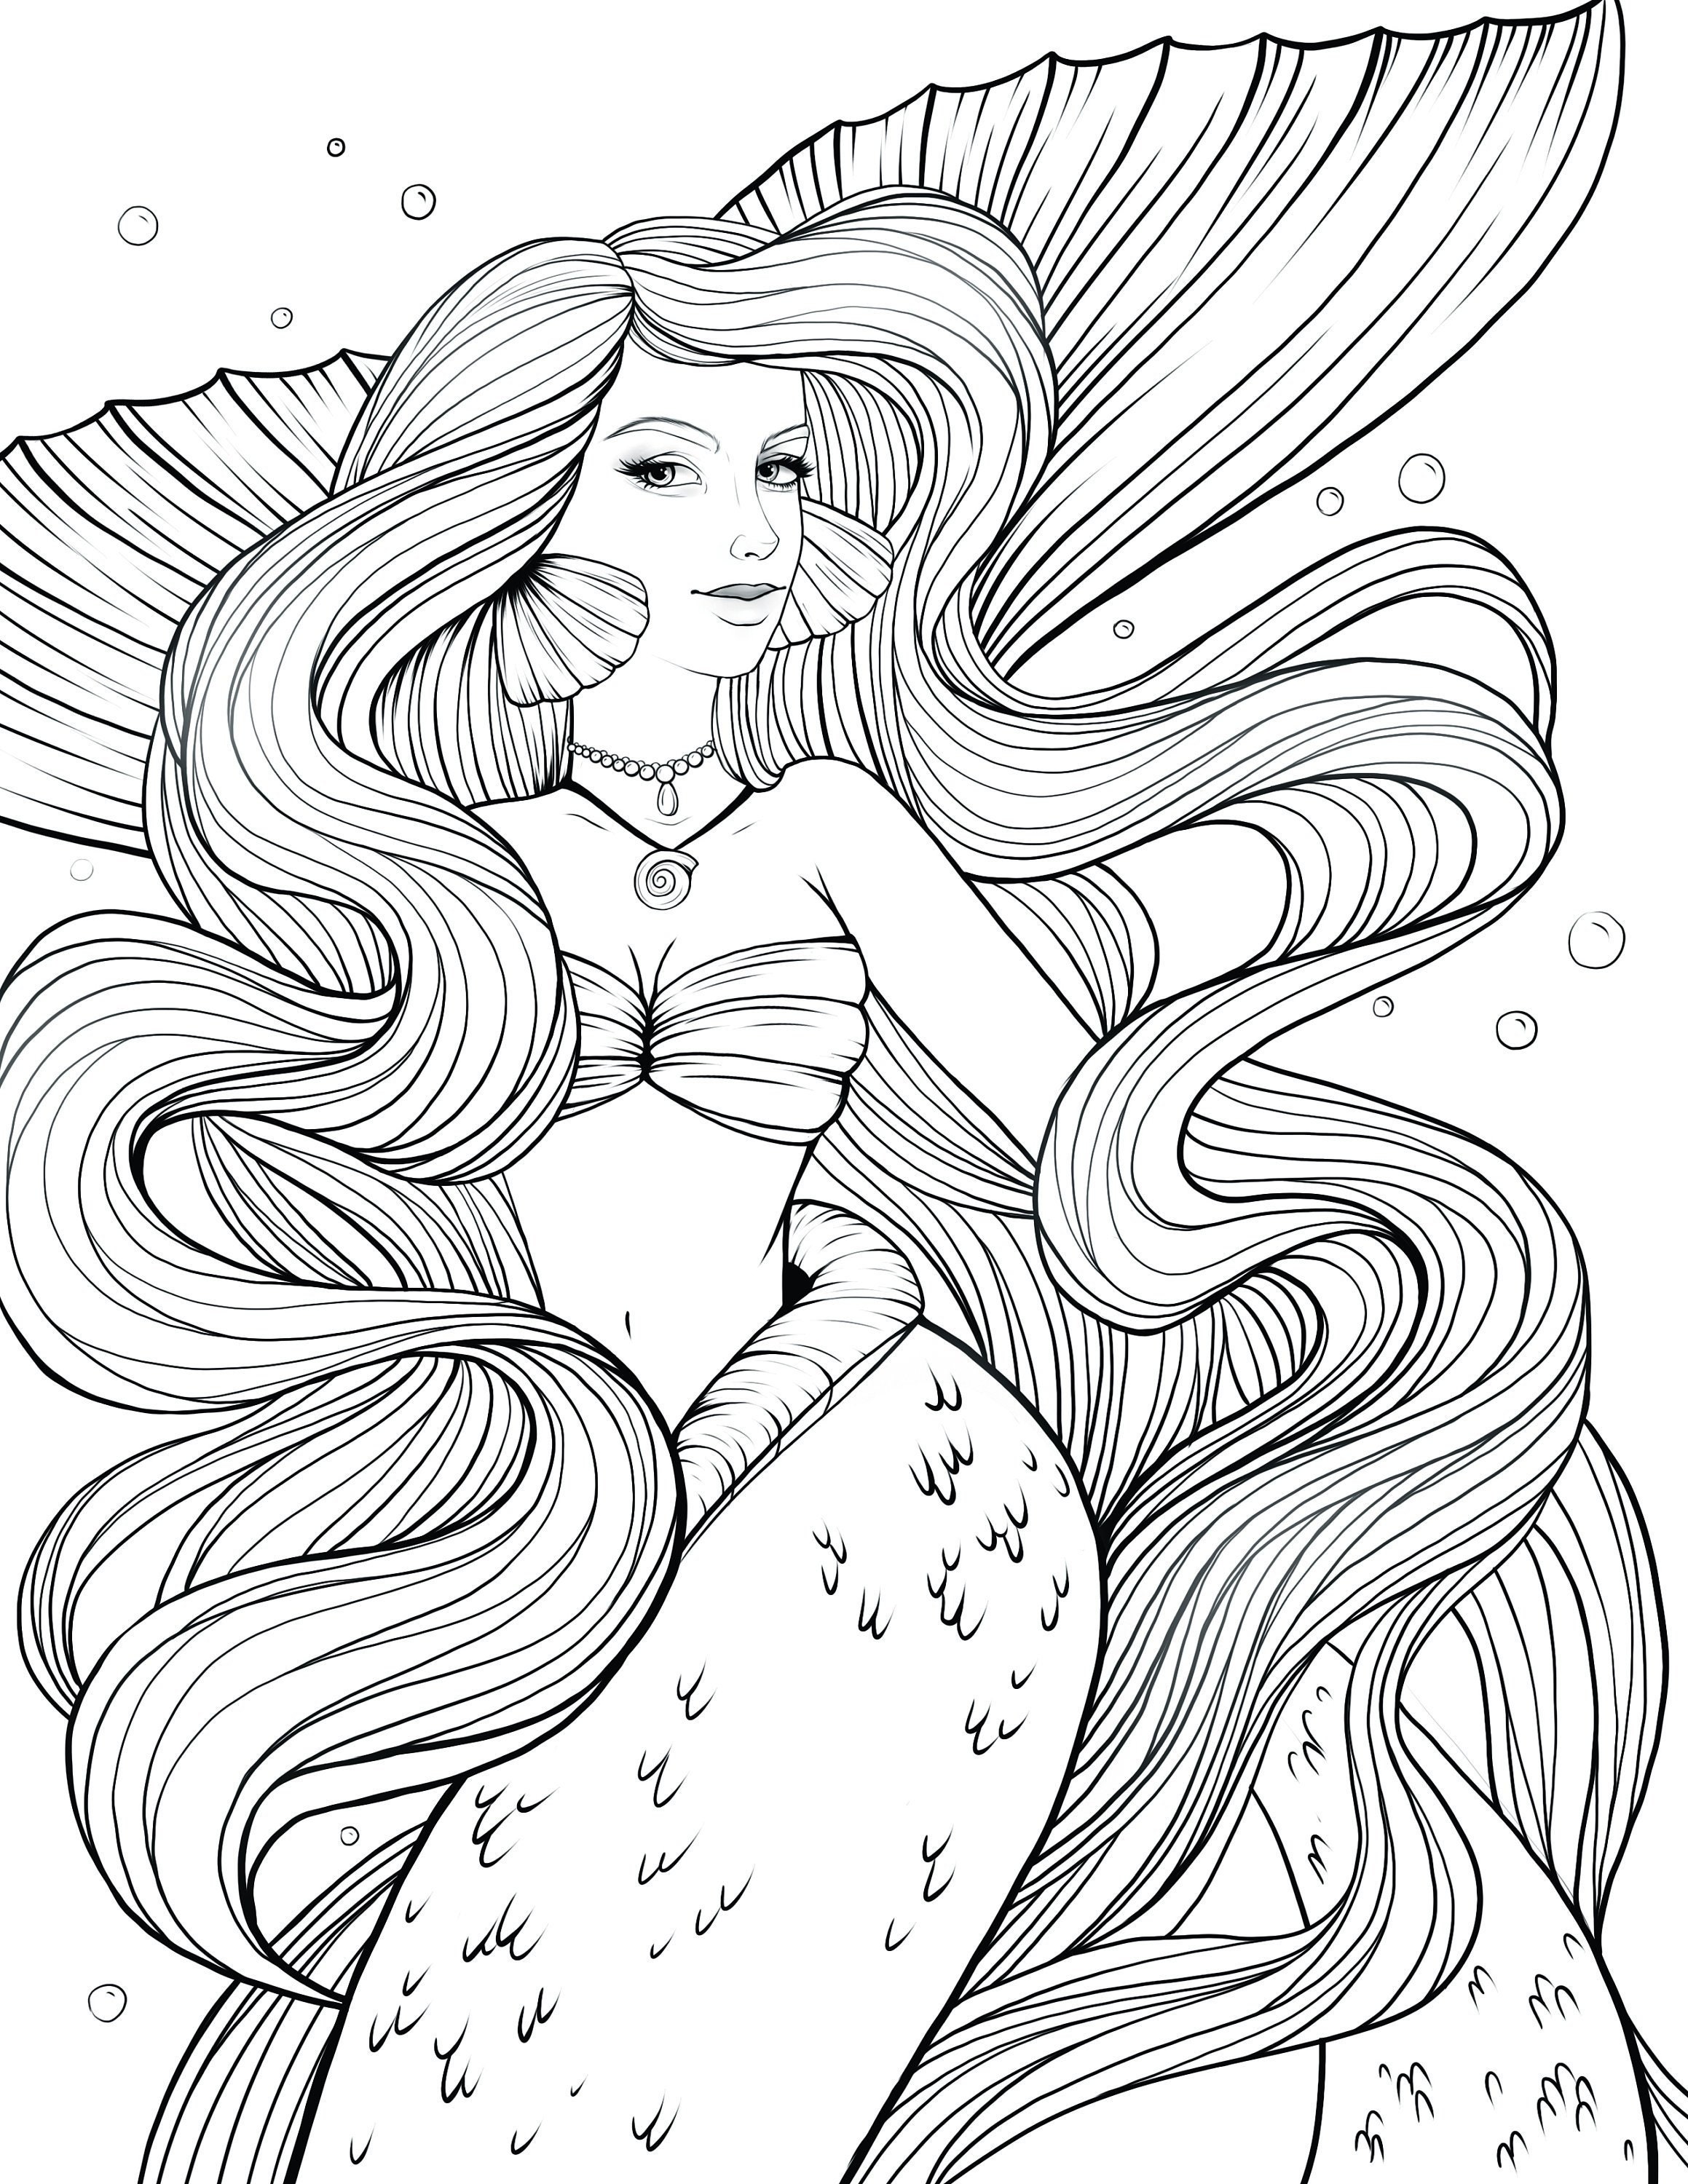 Fantasy Mermaid Coloring Pages For Adults : Mermaid and boat - Mermaids